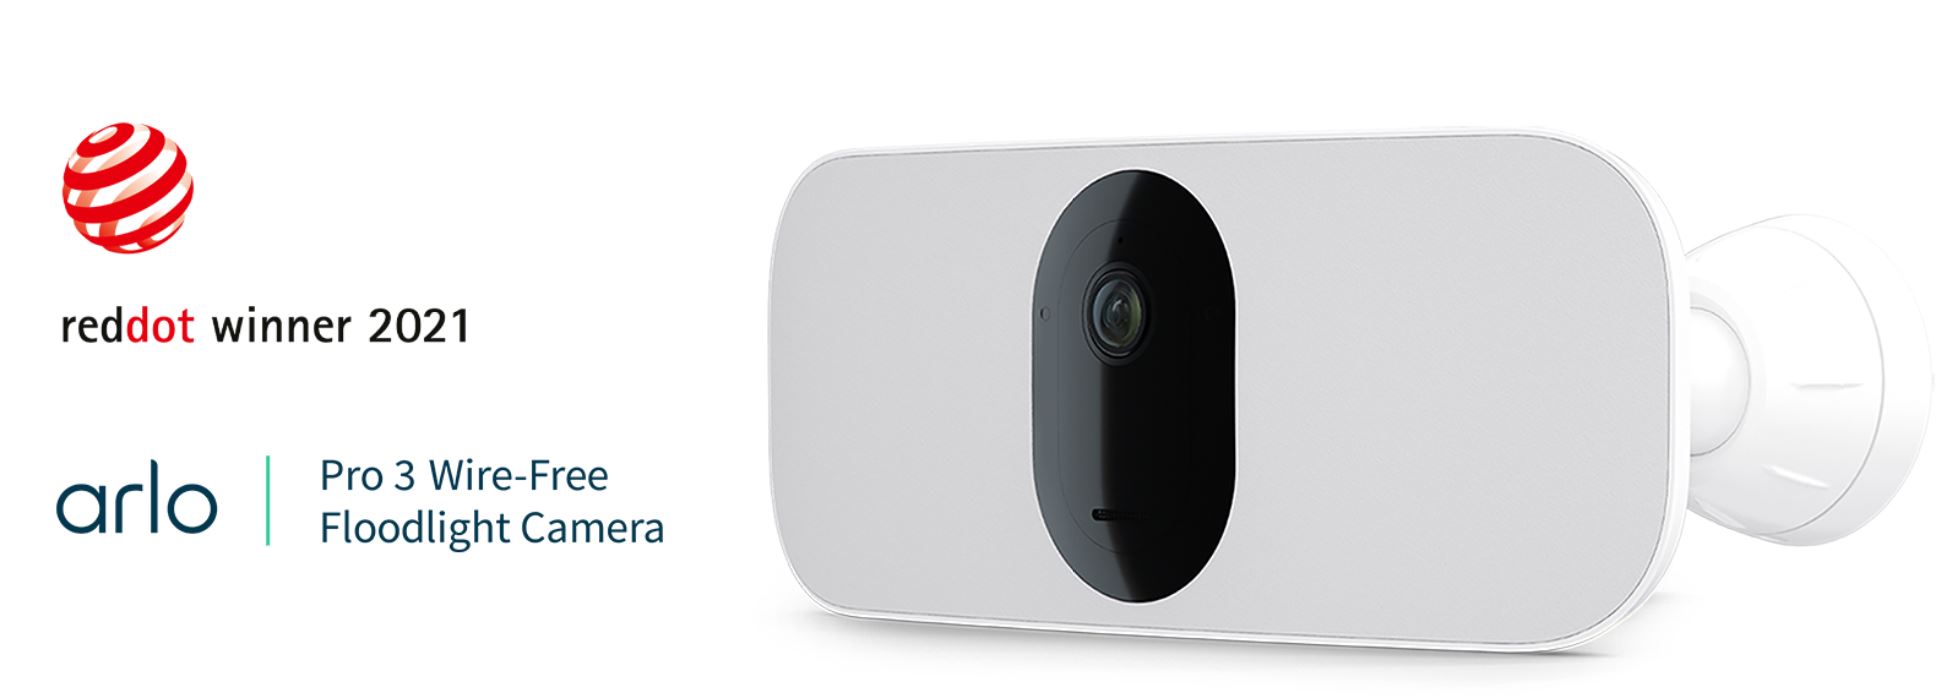 Arlo is for every home and budget